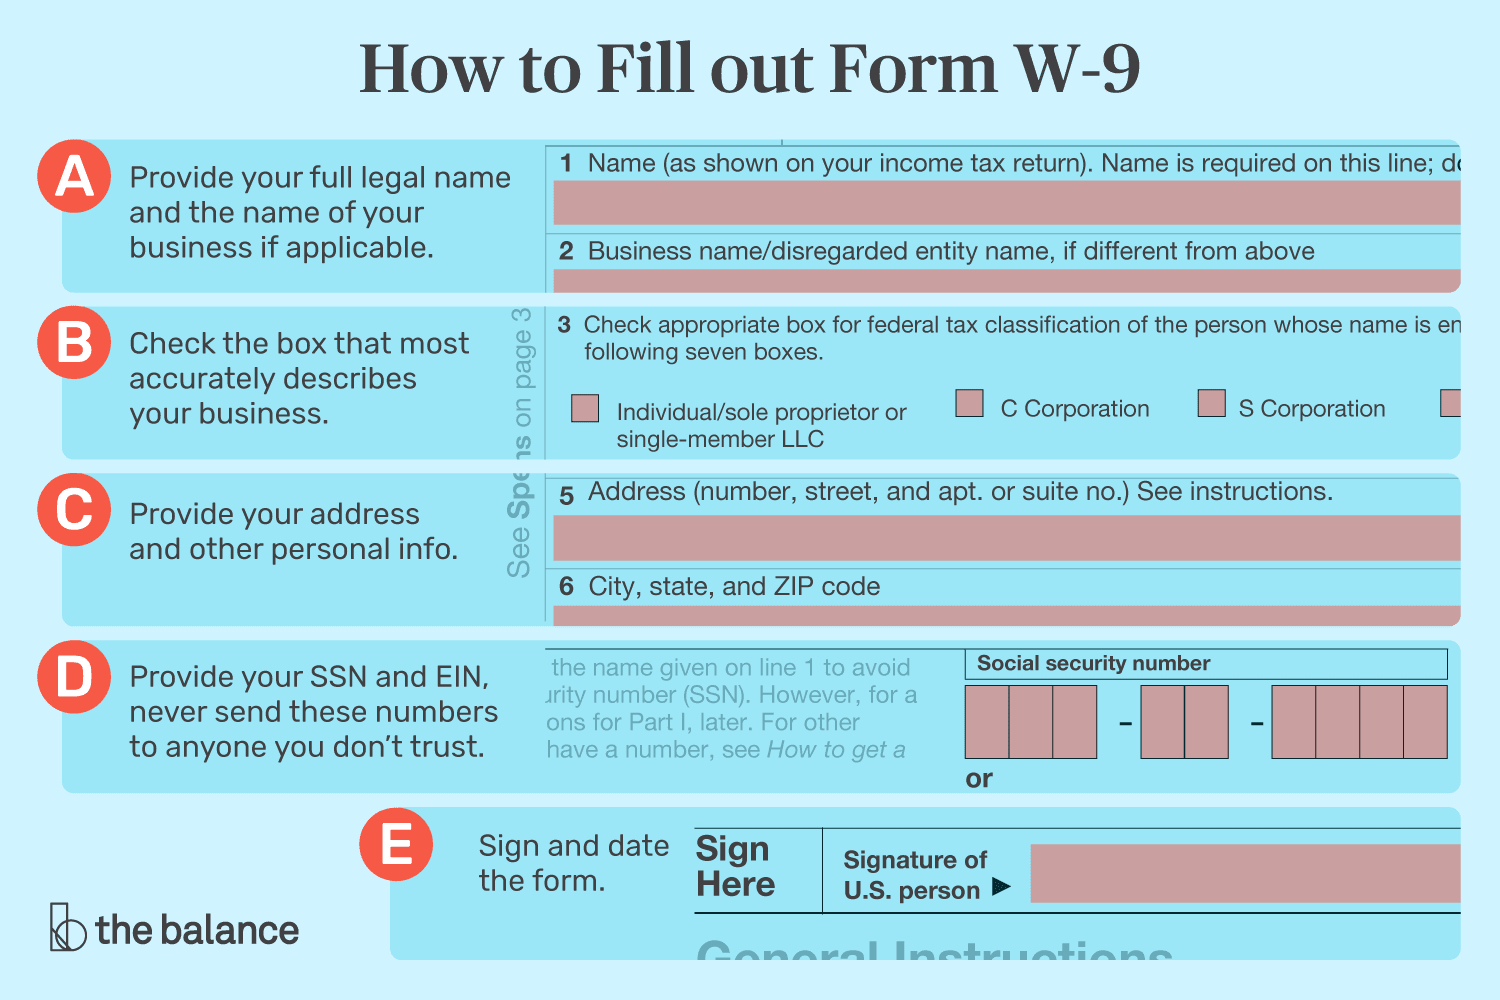 Irs Form W-9: What Is It?